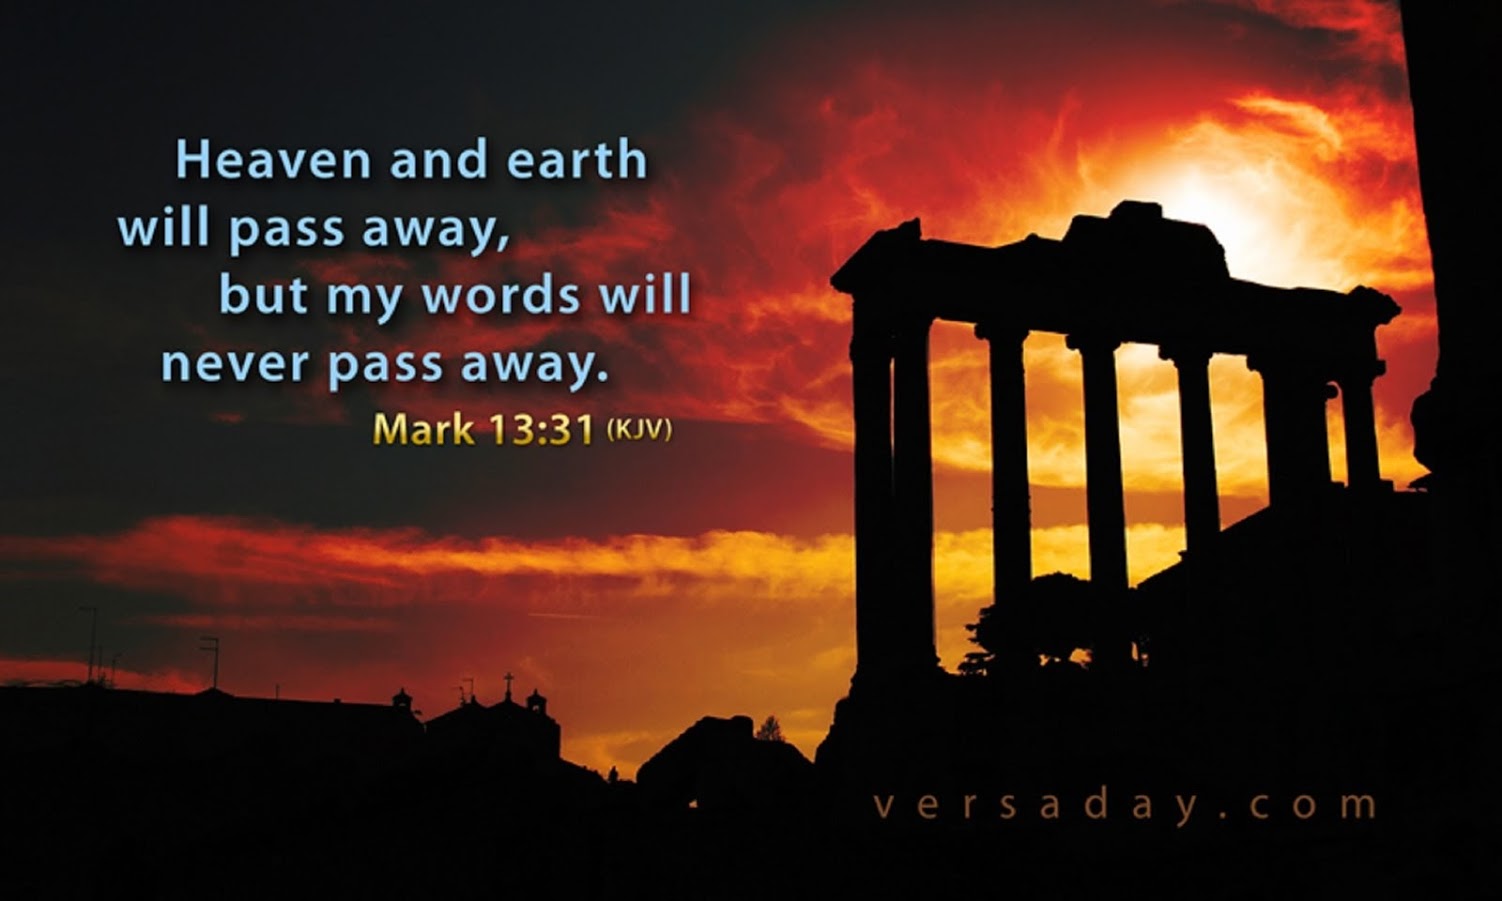 HEAVEN AND EARTH WILL PASS AWAY, BUT MY WORDS SHALL NOT PASS AWAY.